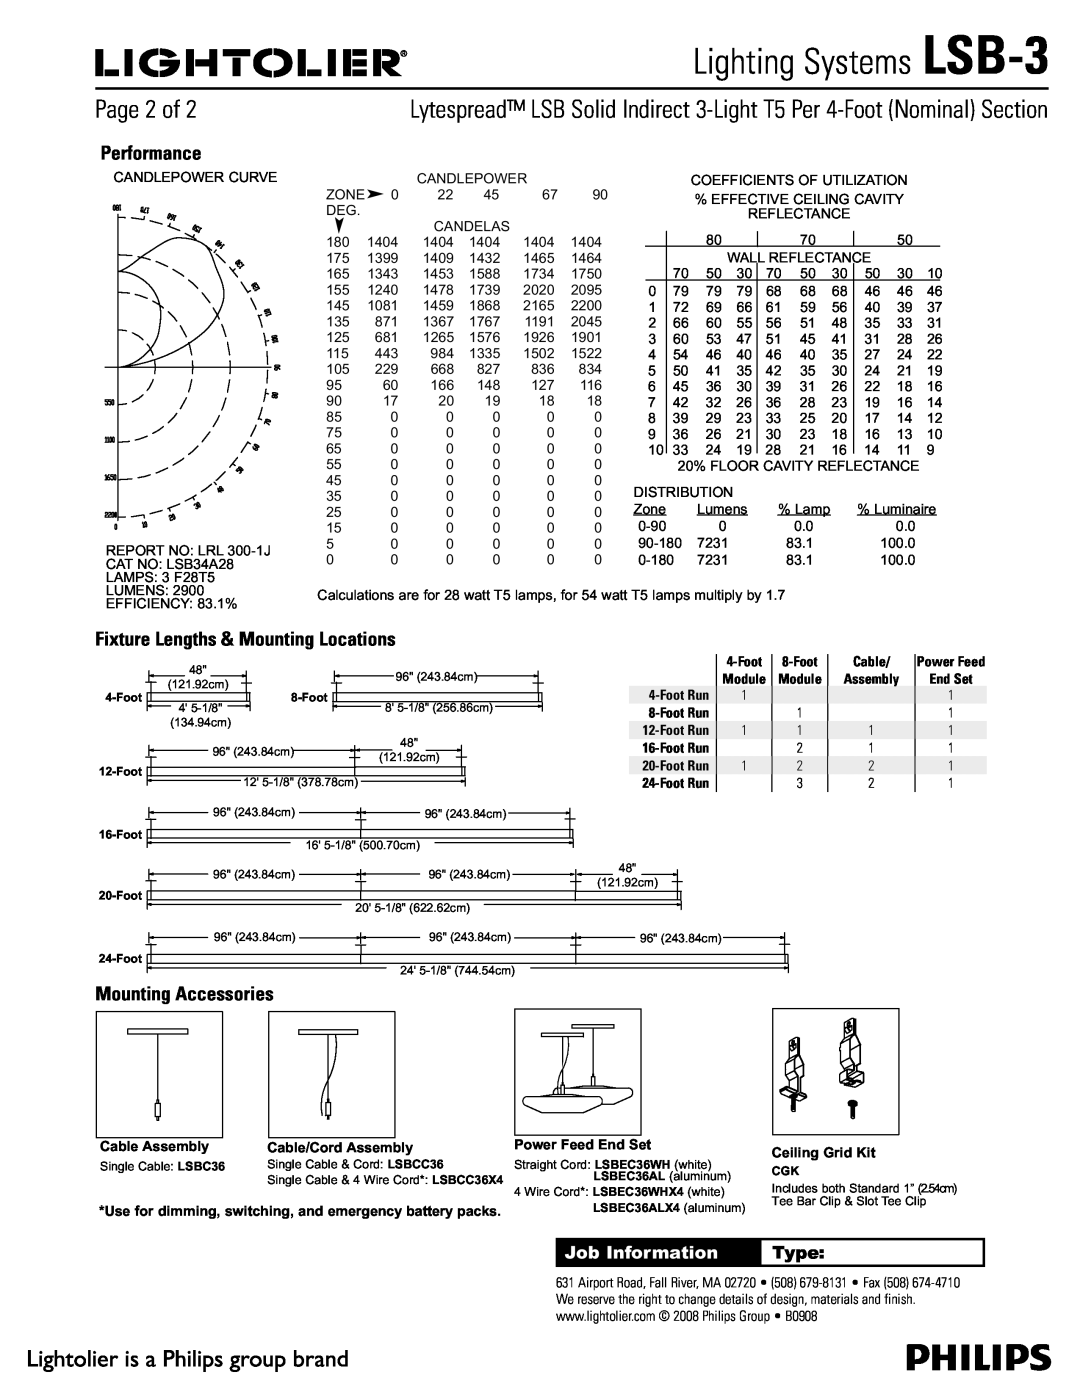 Lightolier manual Fixture Lengths & Mounting Locations, Mounting Accessories, Performance, Lighting Systems LSB-3, Type 